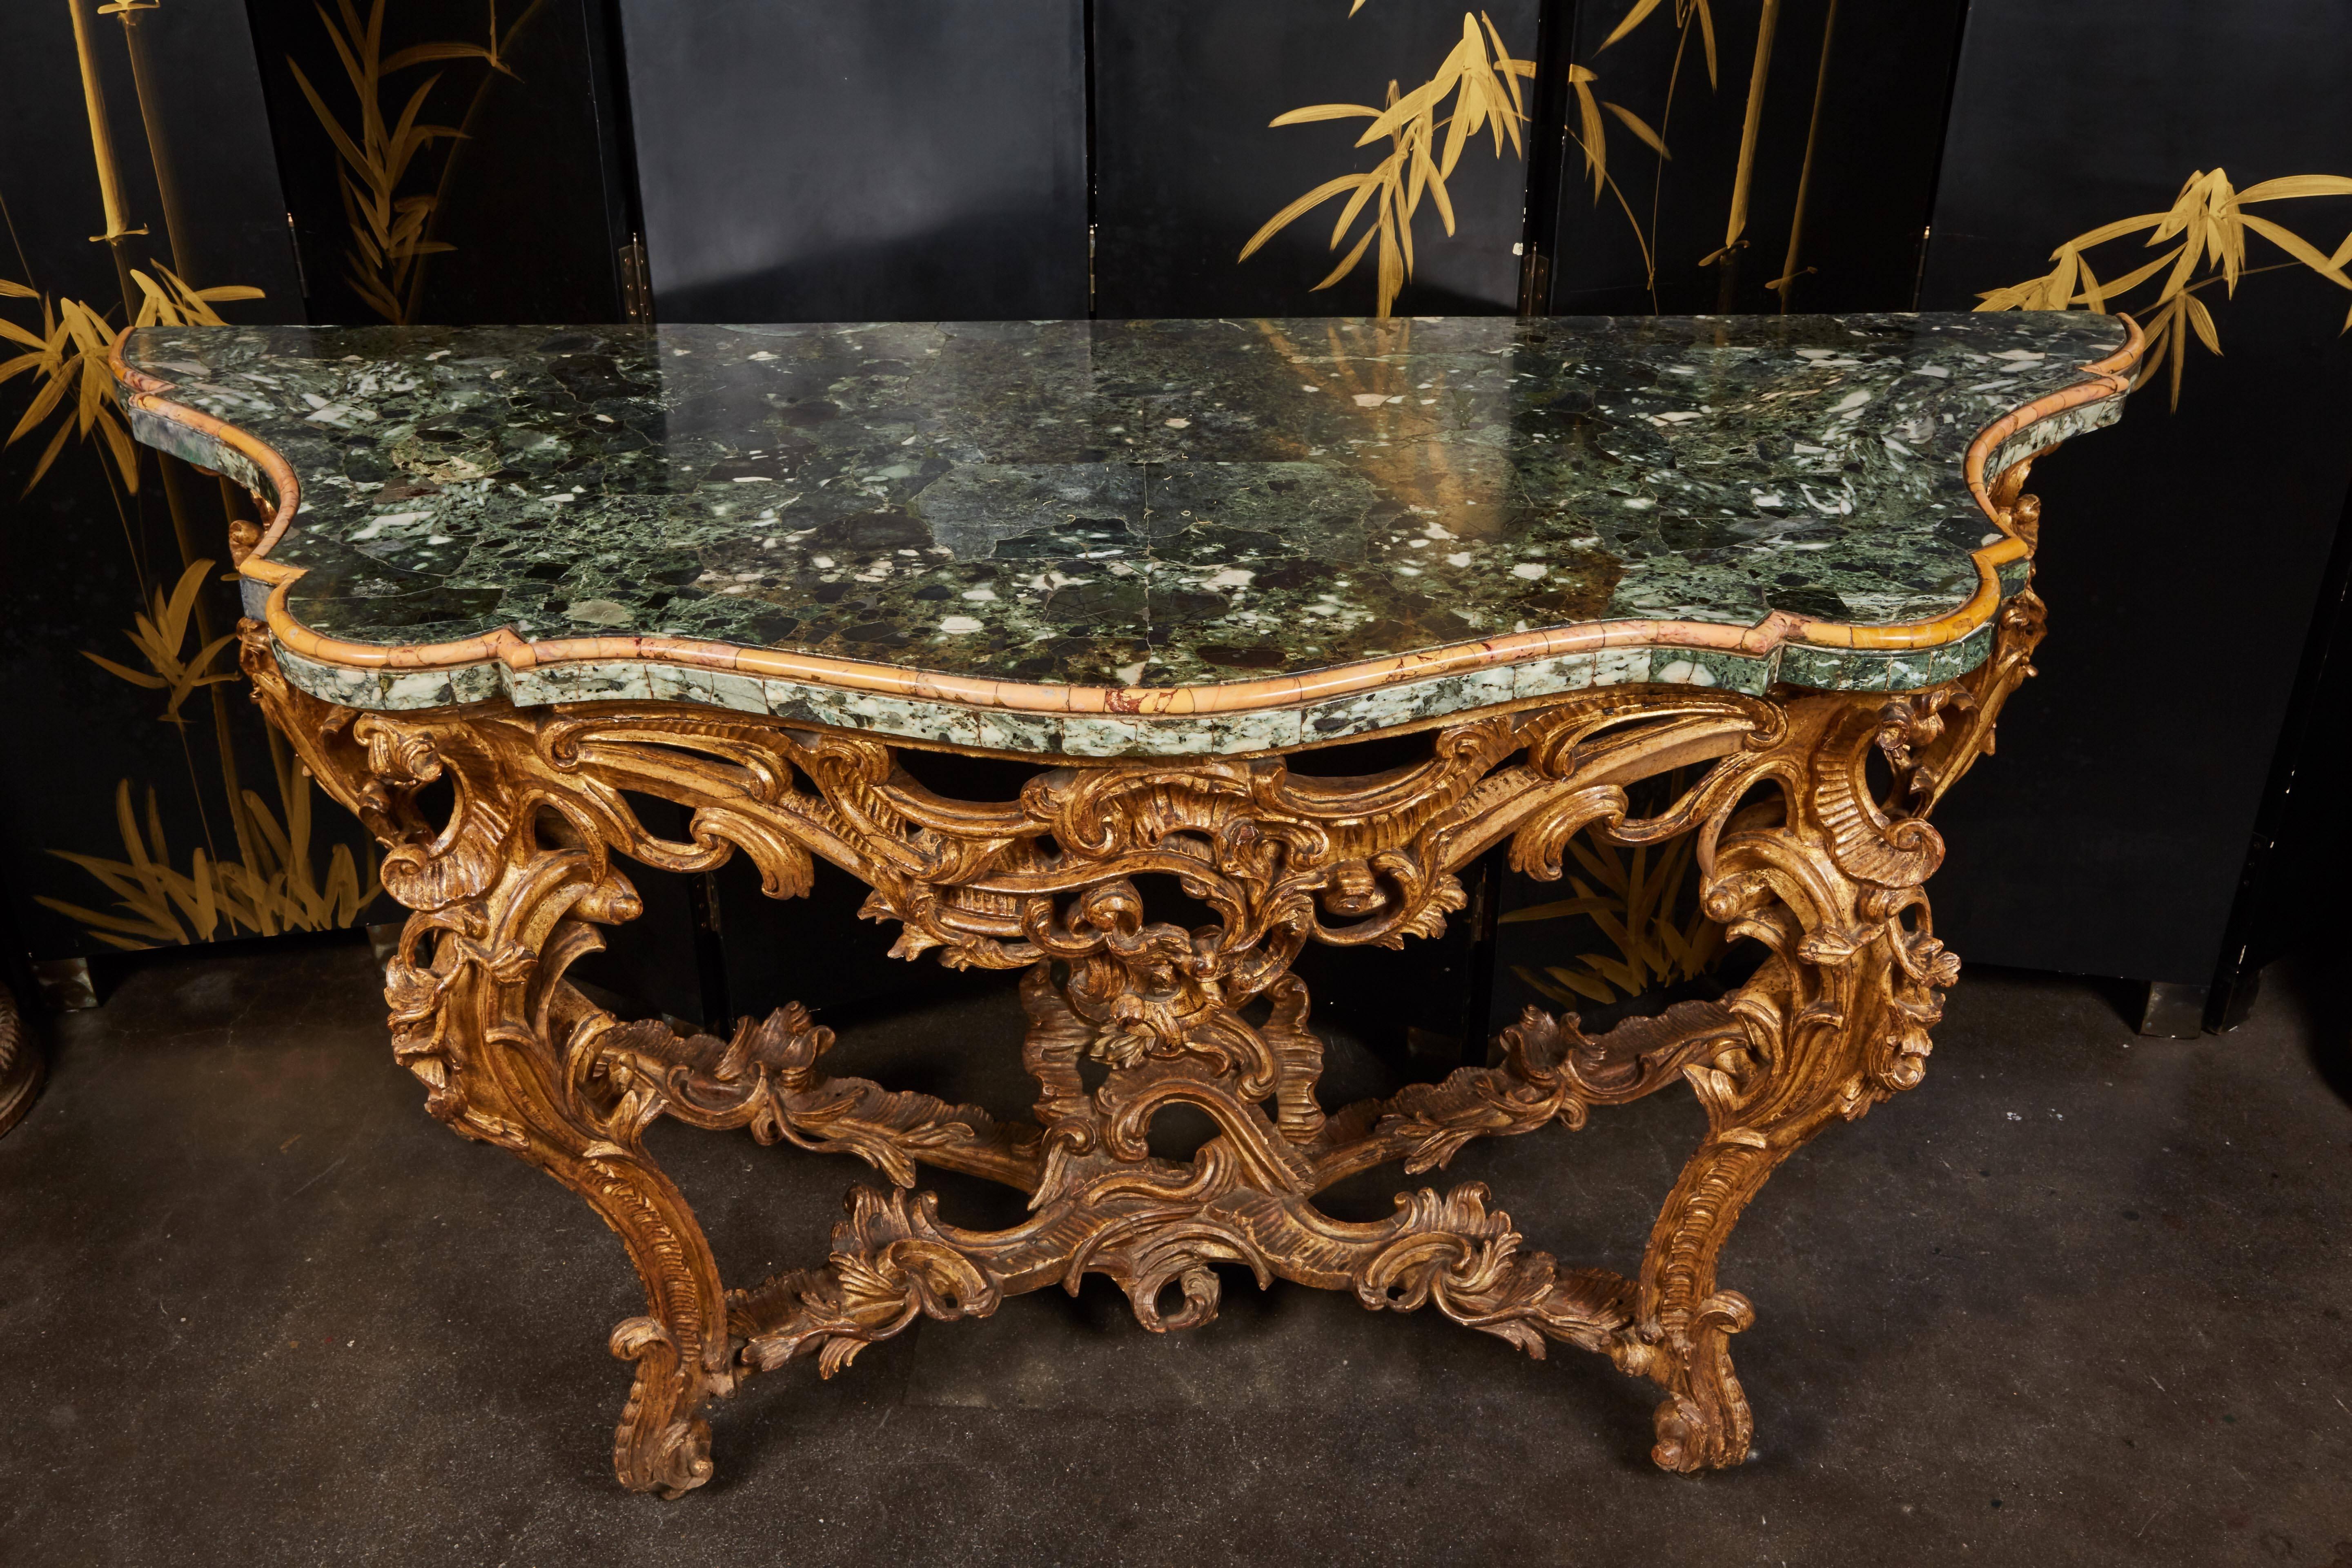 Large Mid-18th Century Italian Rococo Giltwood Green Marble-Top Console For Sale 4